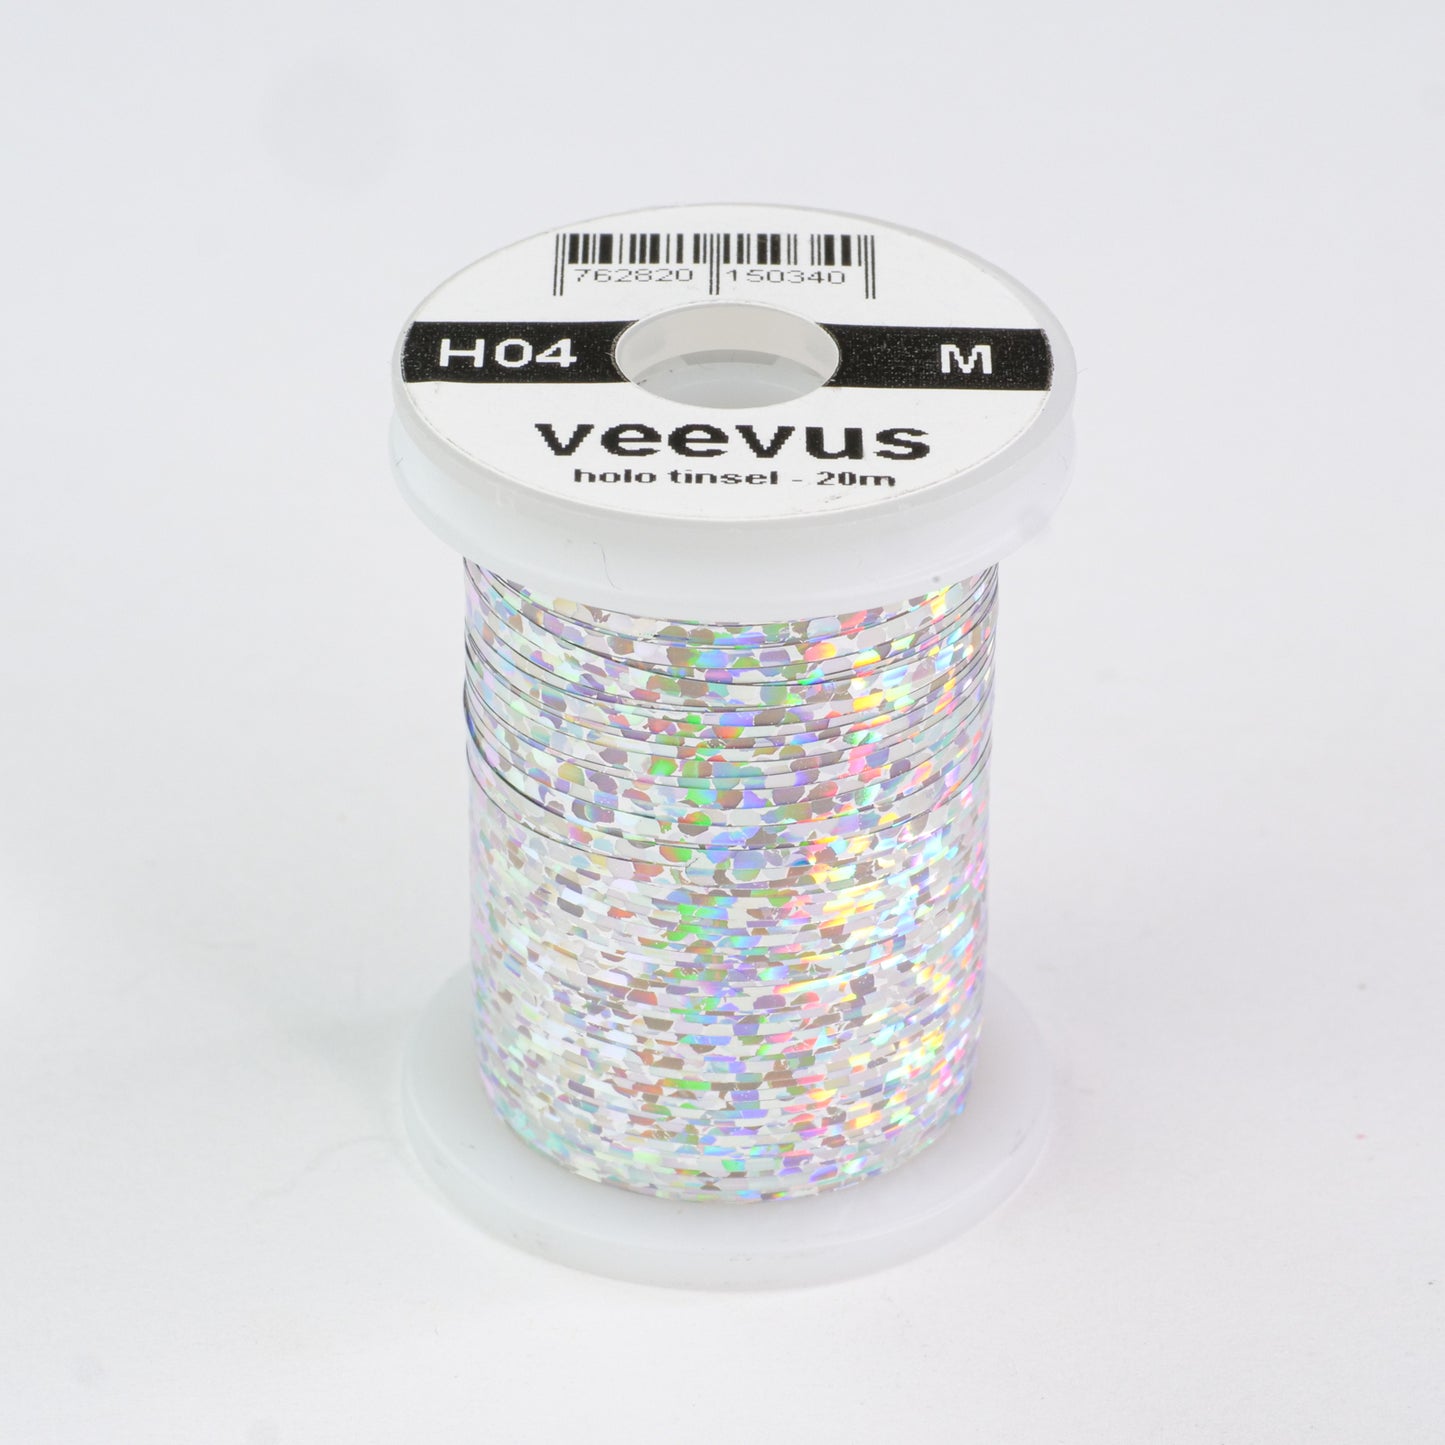 Veevus Holographic Tinsel (small and medium)